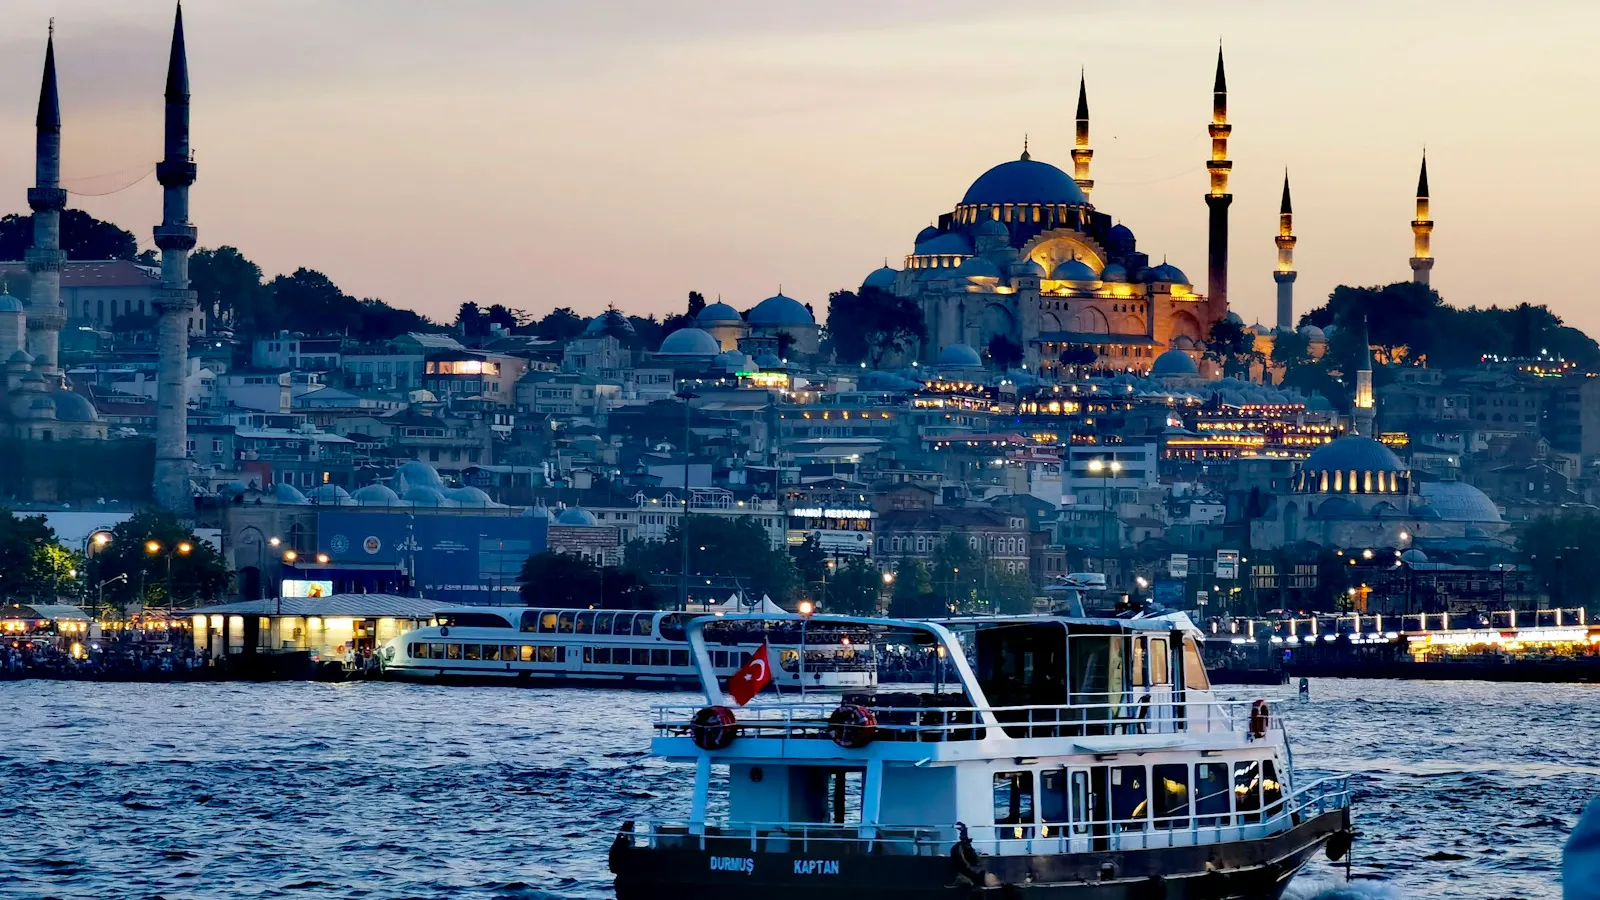 Istanbul is a popular tourist destination but visitors should be aware of common scams like the shoe shine, friendship bracelet, and taxi meter tricks that target unwitting travelers.